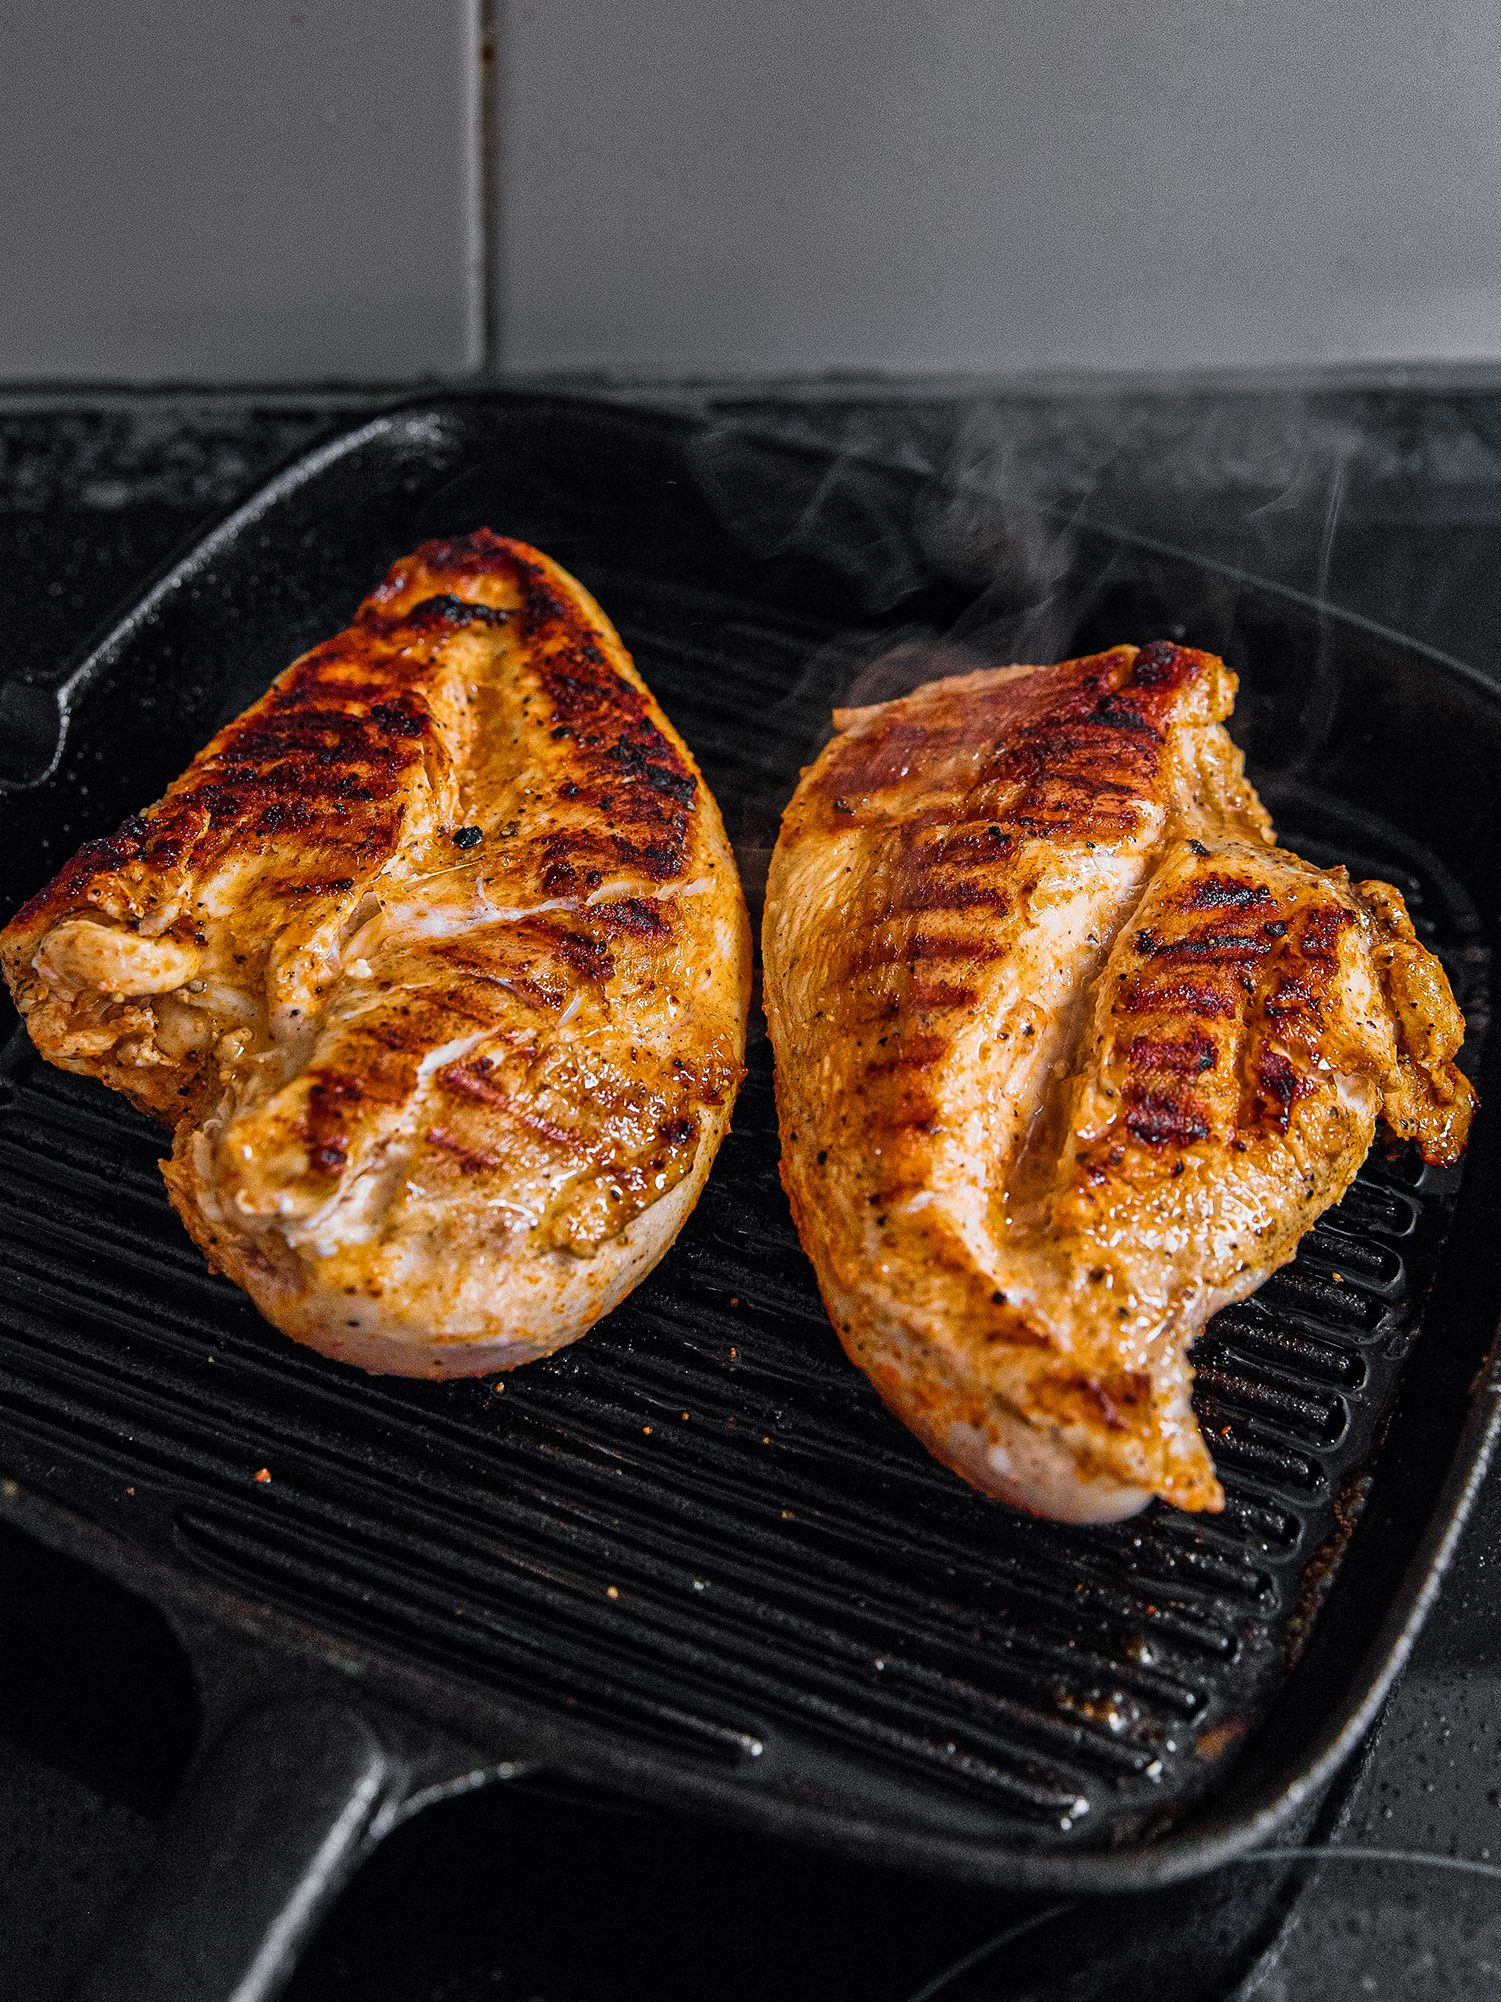 Preheat grill to medium heat. Place chicken on the grill and cook for around 5 - 6 minutes on each side, ensuring the internal temperature of the chicken reaches 165˚F. Cut into small pieces and set aside.